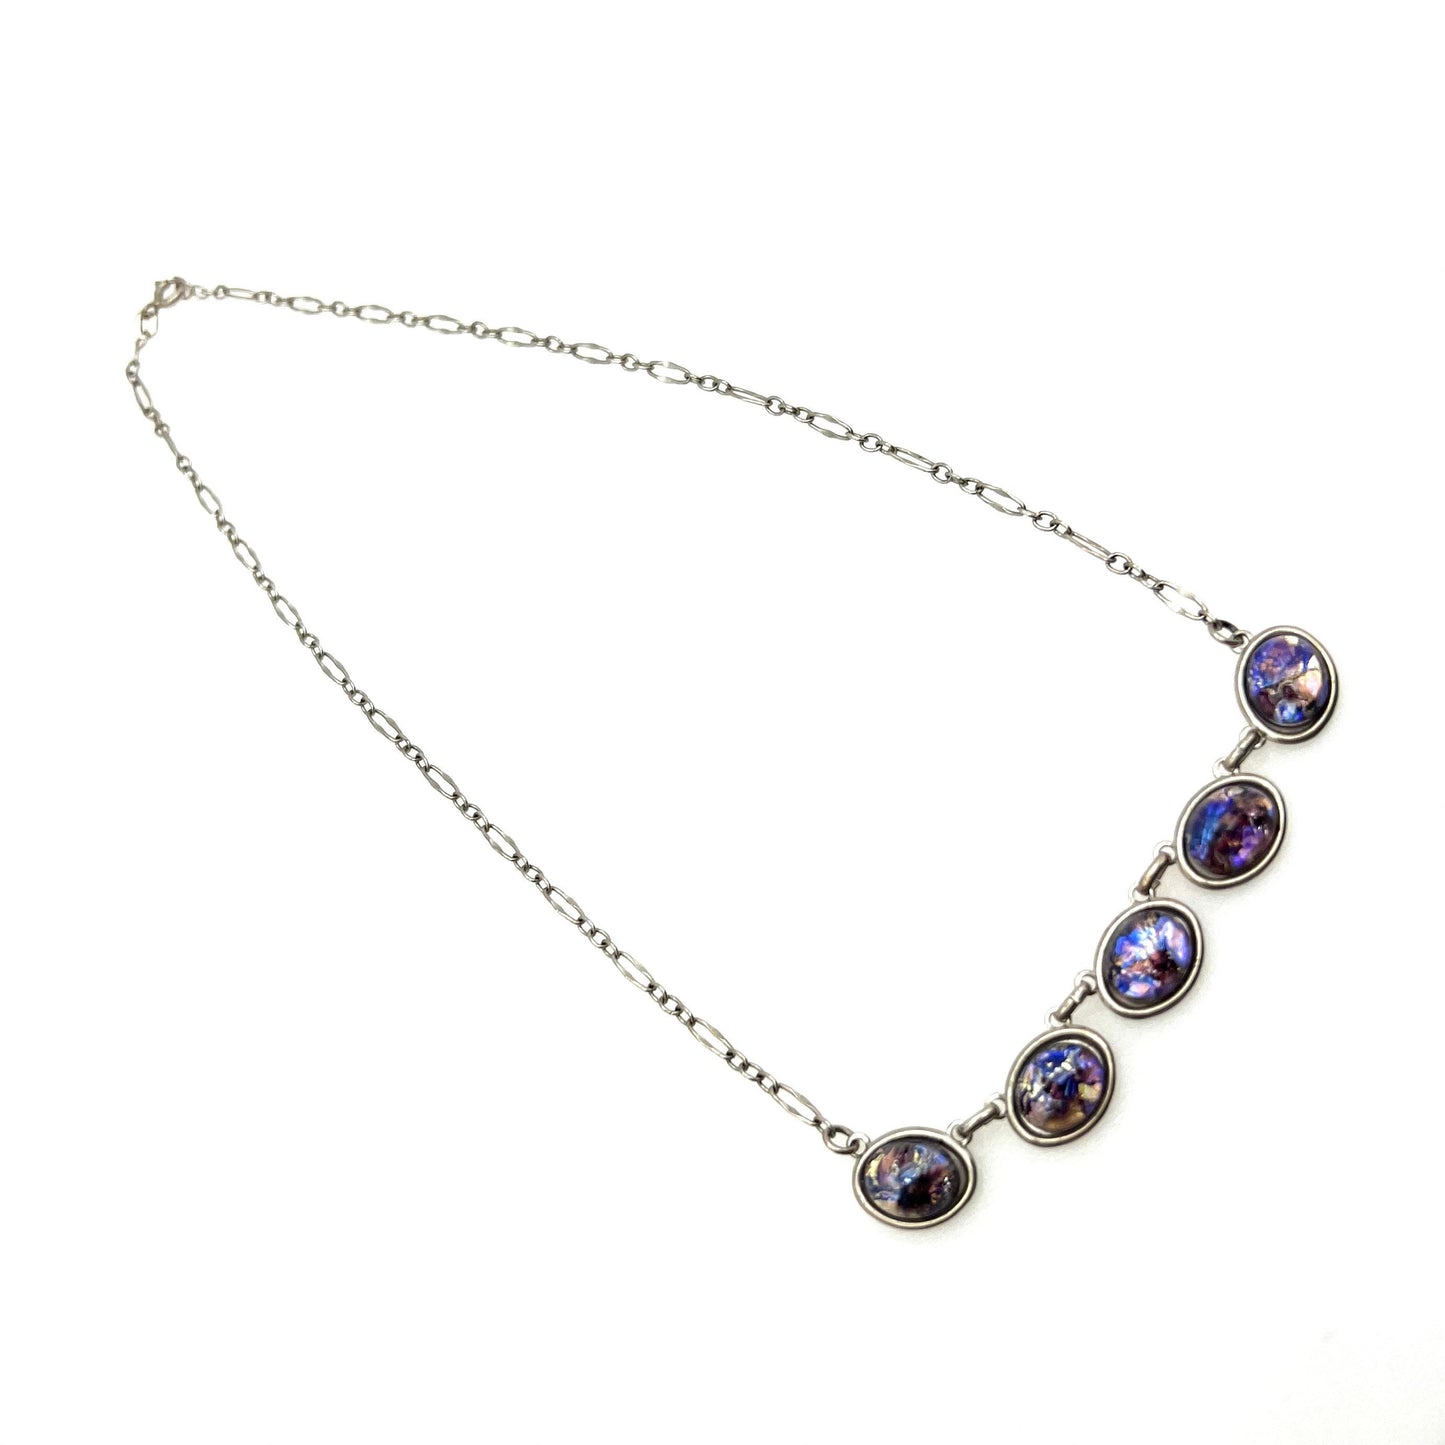 Signed 'OPLA 925' Silver Necklace with Five Art Glass Glass Cabochons